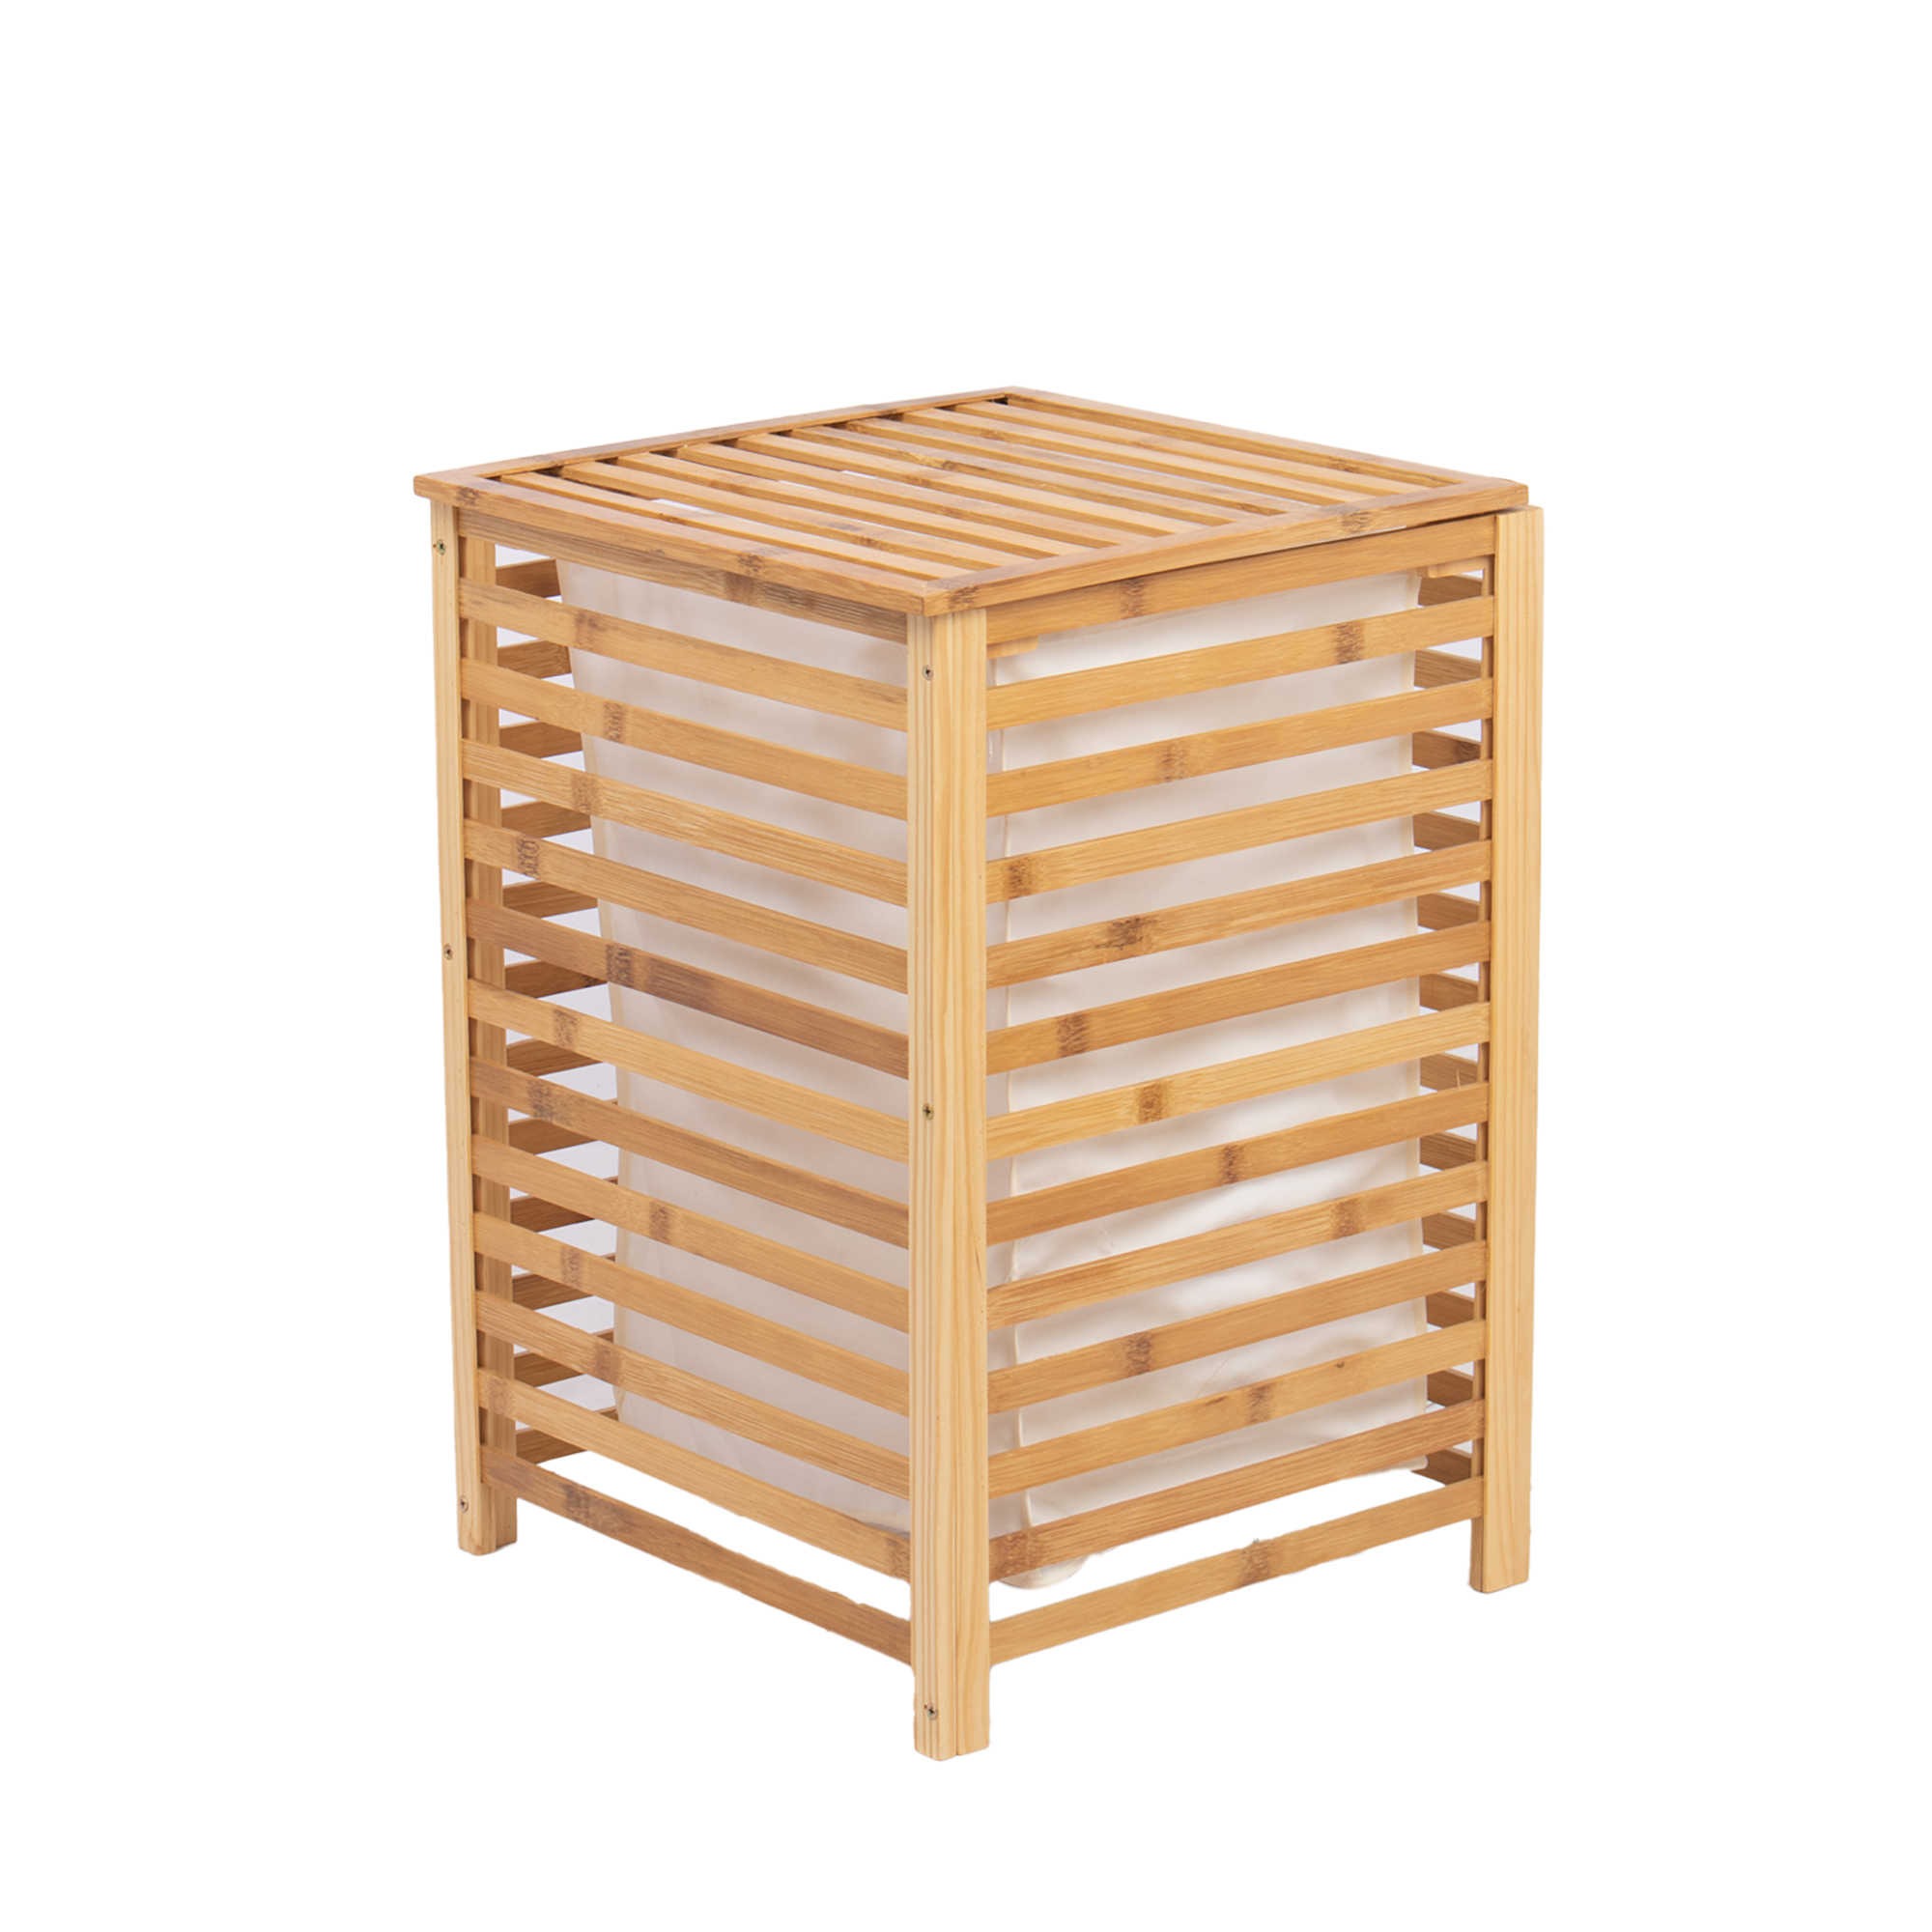 Bamboo Wooden Laundry Basket With Lid Wholesale Vietnam